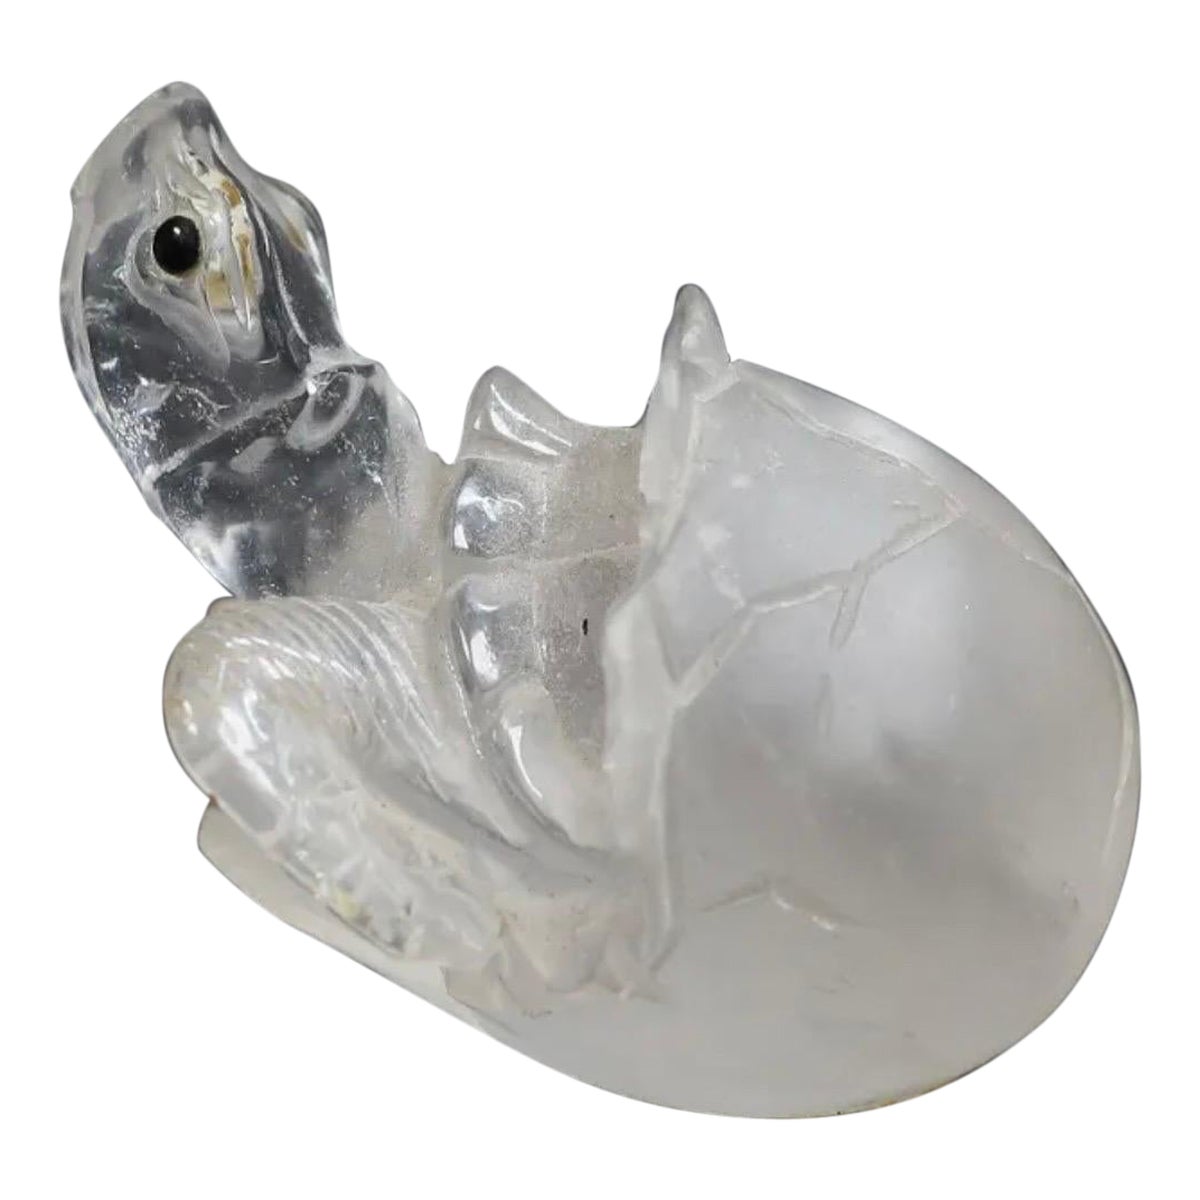 Wonderful Carved Rock Crystal Sculpture Turtle Paperweight Desk Accessory 